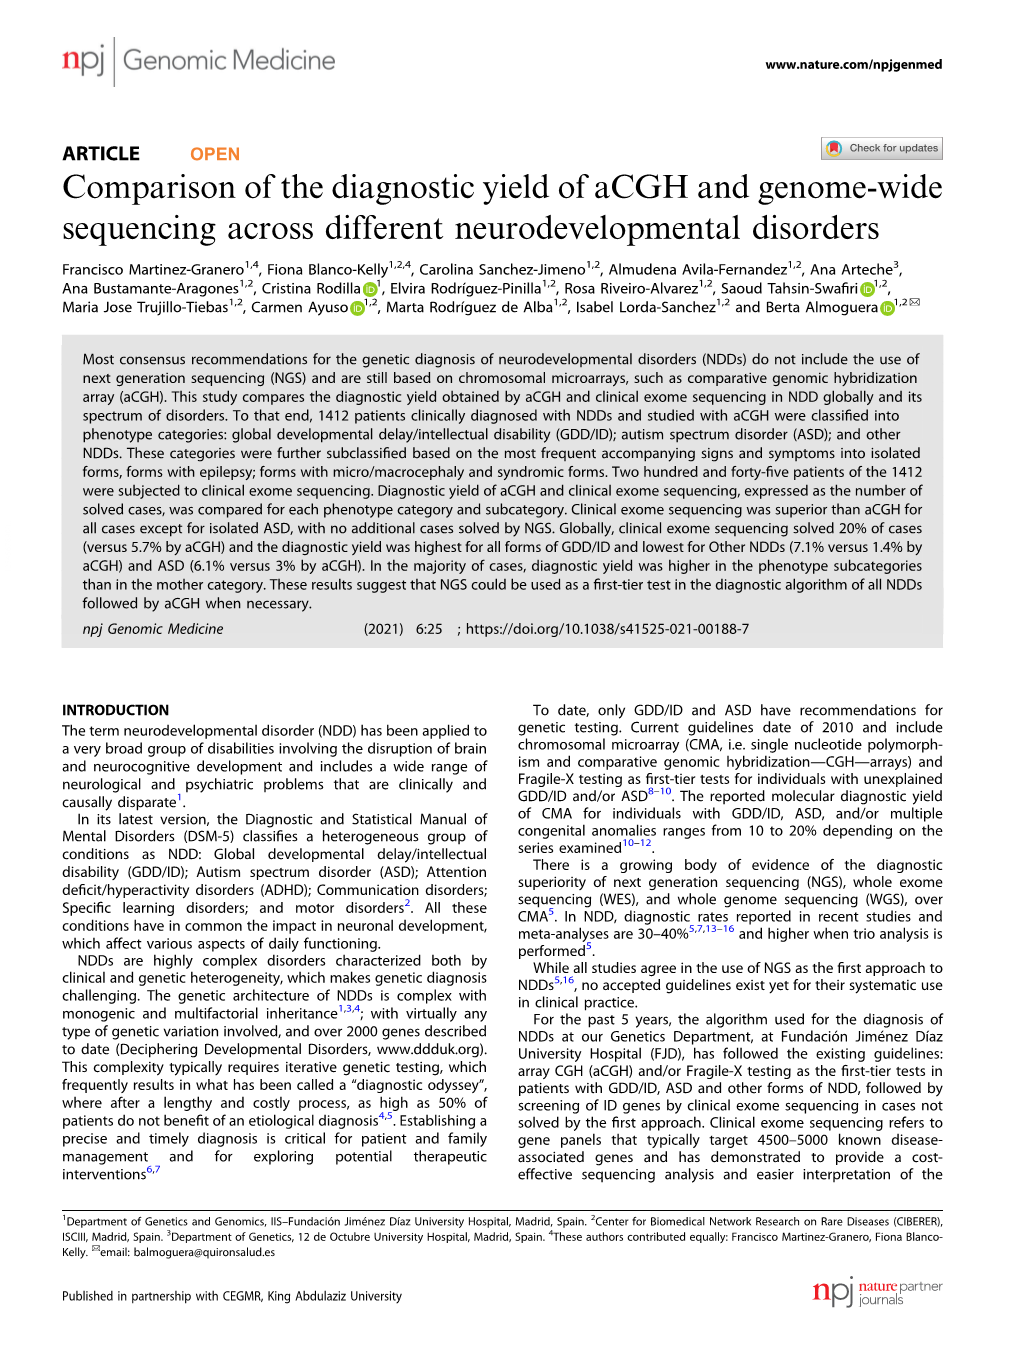 Comparison of the Diagnostic Yield of Acgh and Genome-Wide Sequencing Across Different Neurodevelopmental Disorders